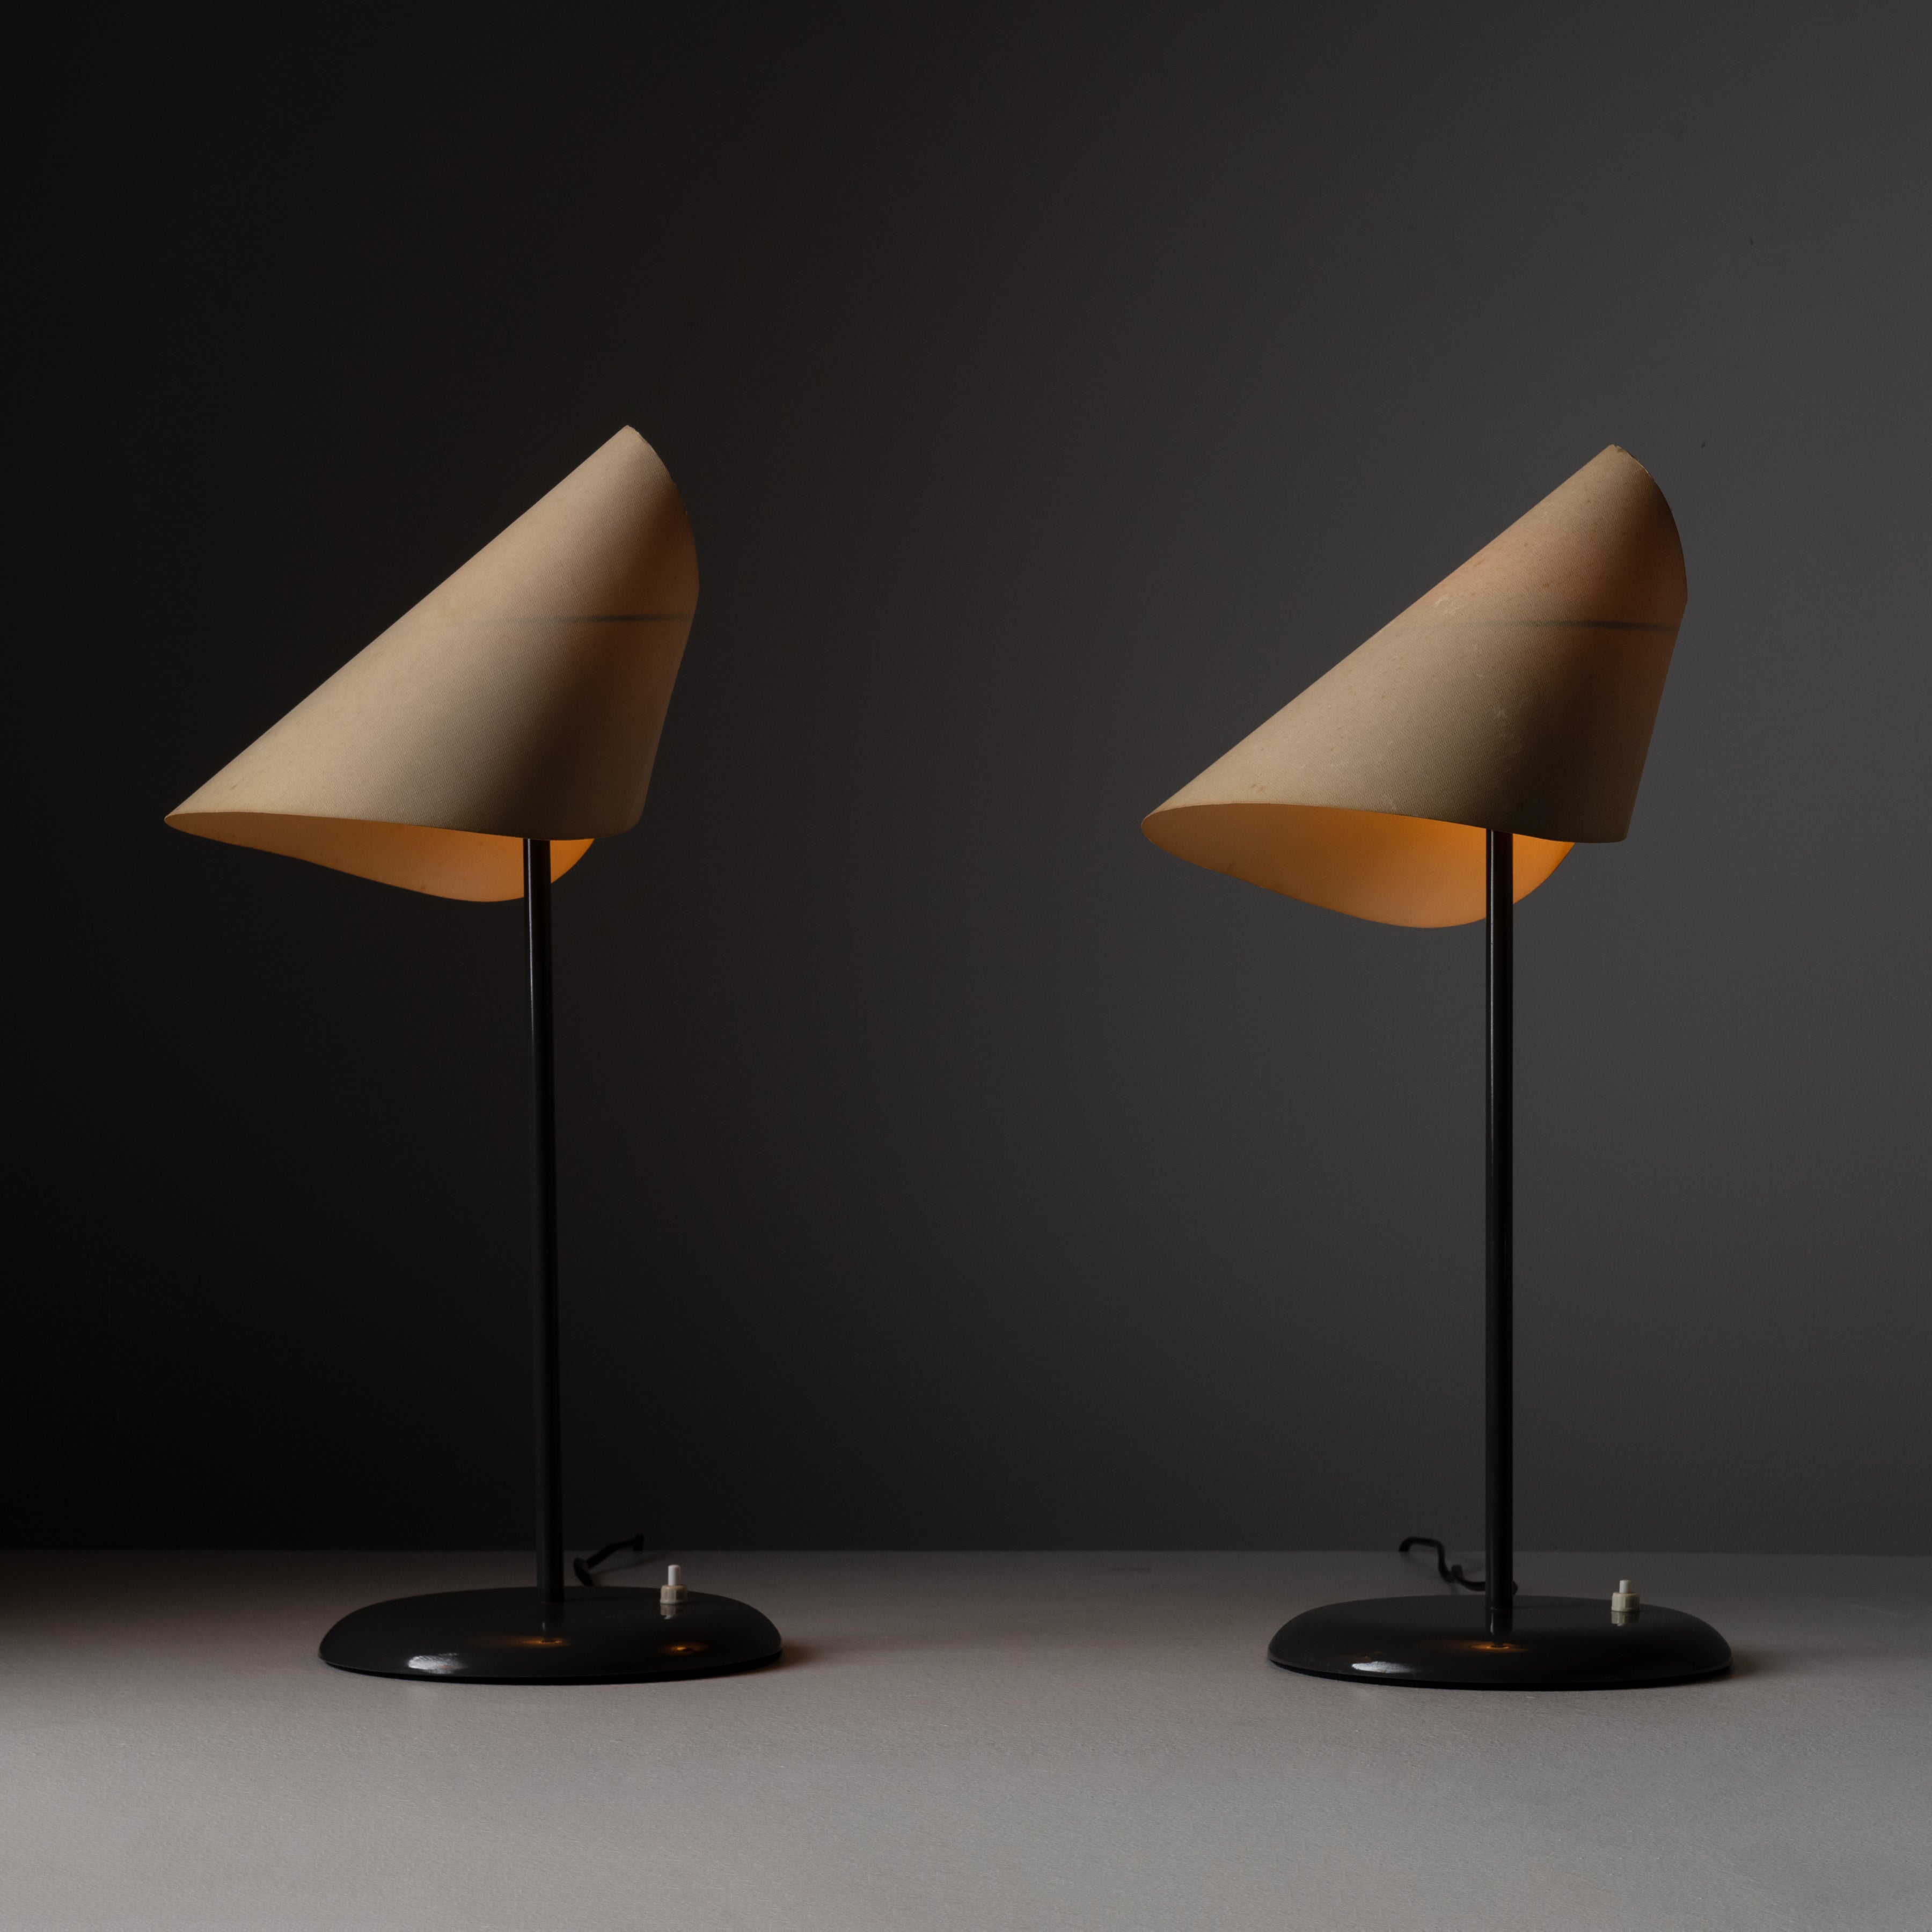 La Lune Sous Le Chapeau table lamps by Man Ray for Sirrah. Designed and manufactured in Italy, in 1973. Minimal and elegant table lamp composed of lacquered grey steel, with a conic paper shade. Each lamp holds an E14 bulb socket. We recommend using